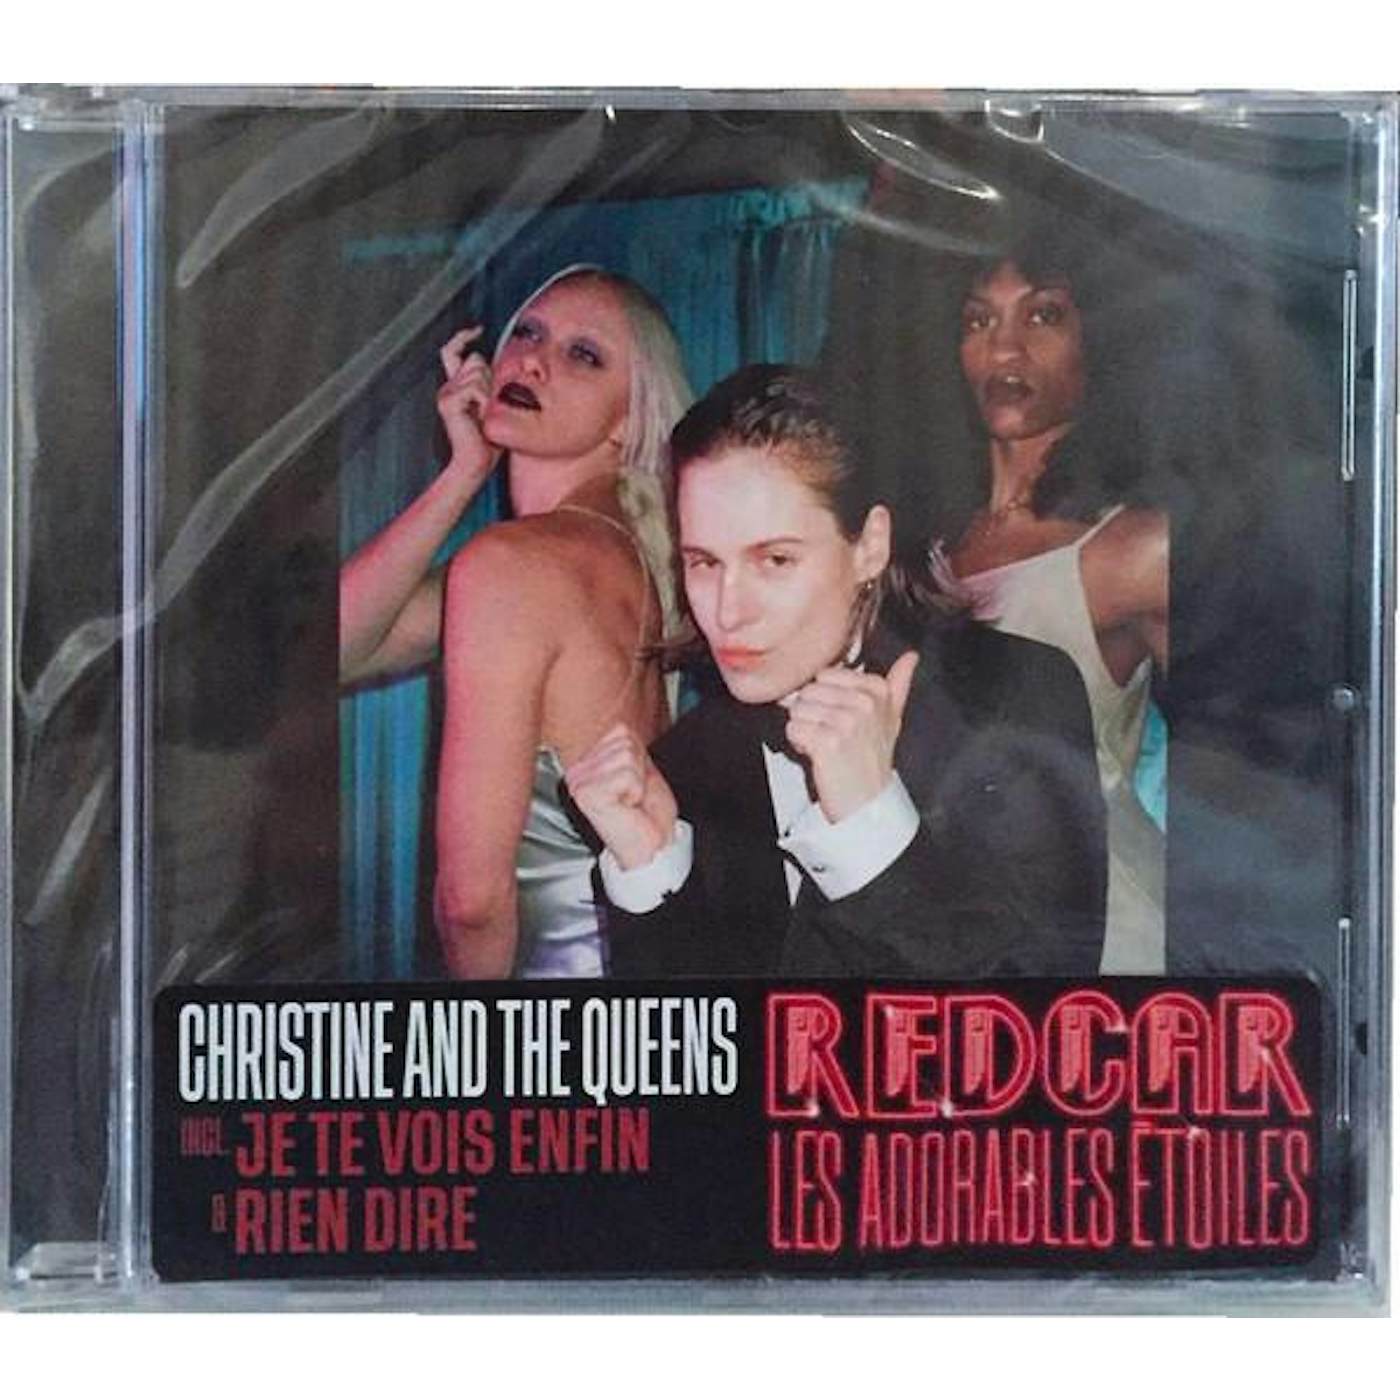 Christine and the Queens REDCAR LES ADORABLE ÉTOILES CD